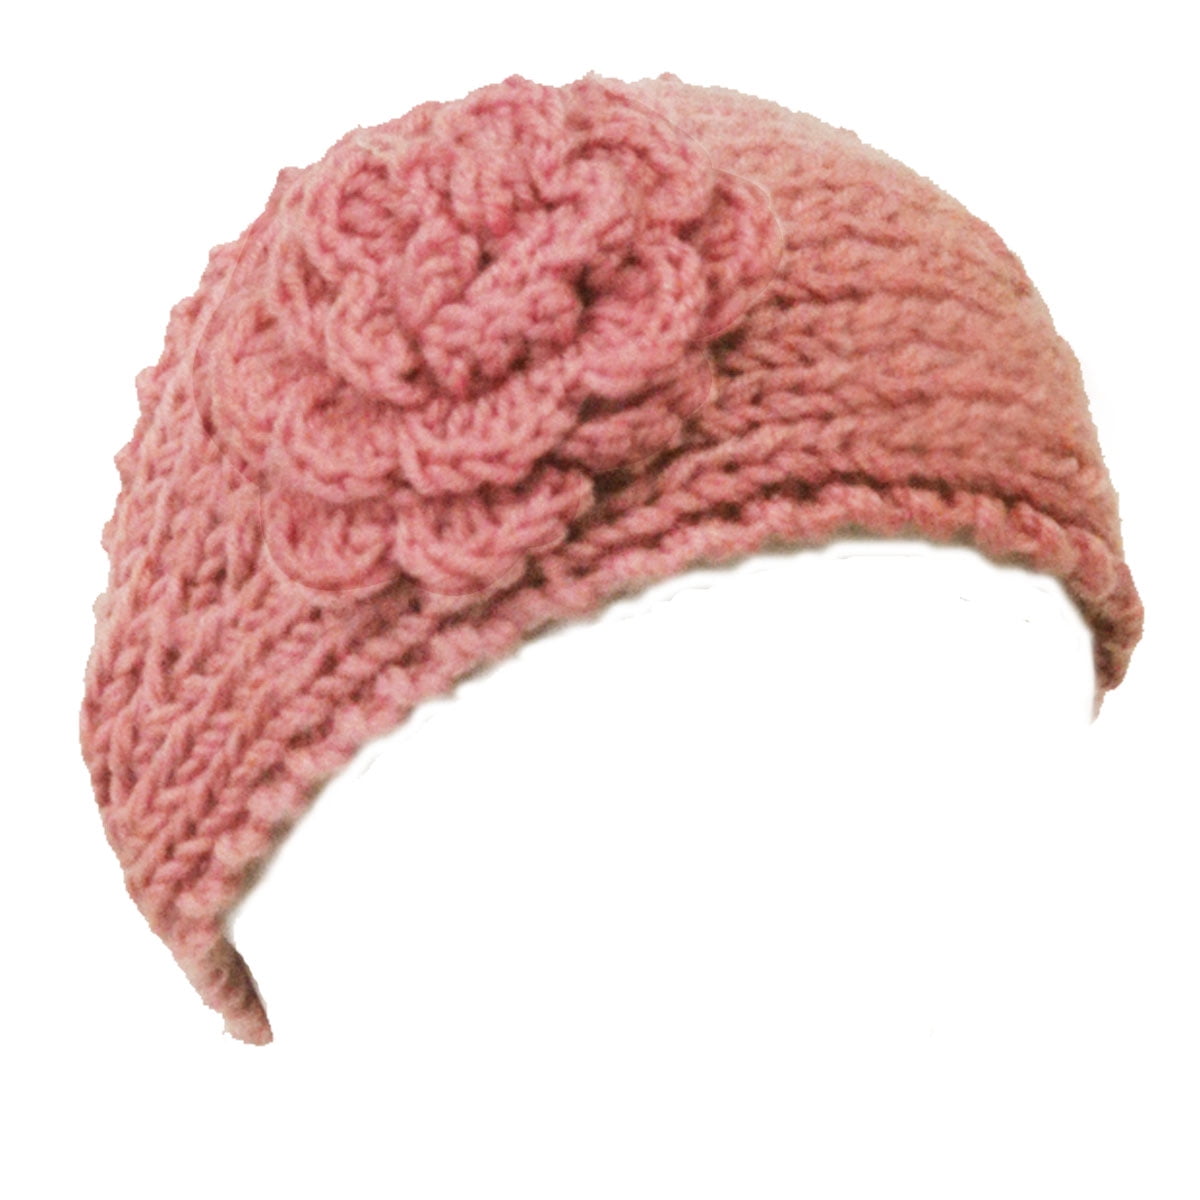 Vintage 1970's pink hand knitted winter hat